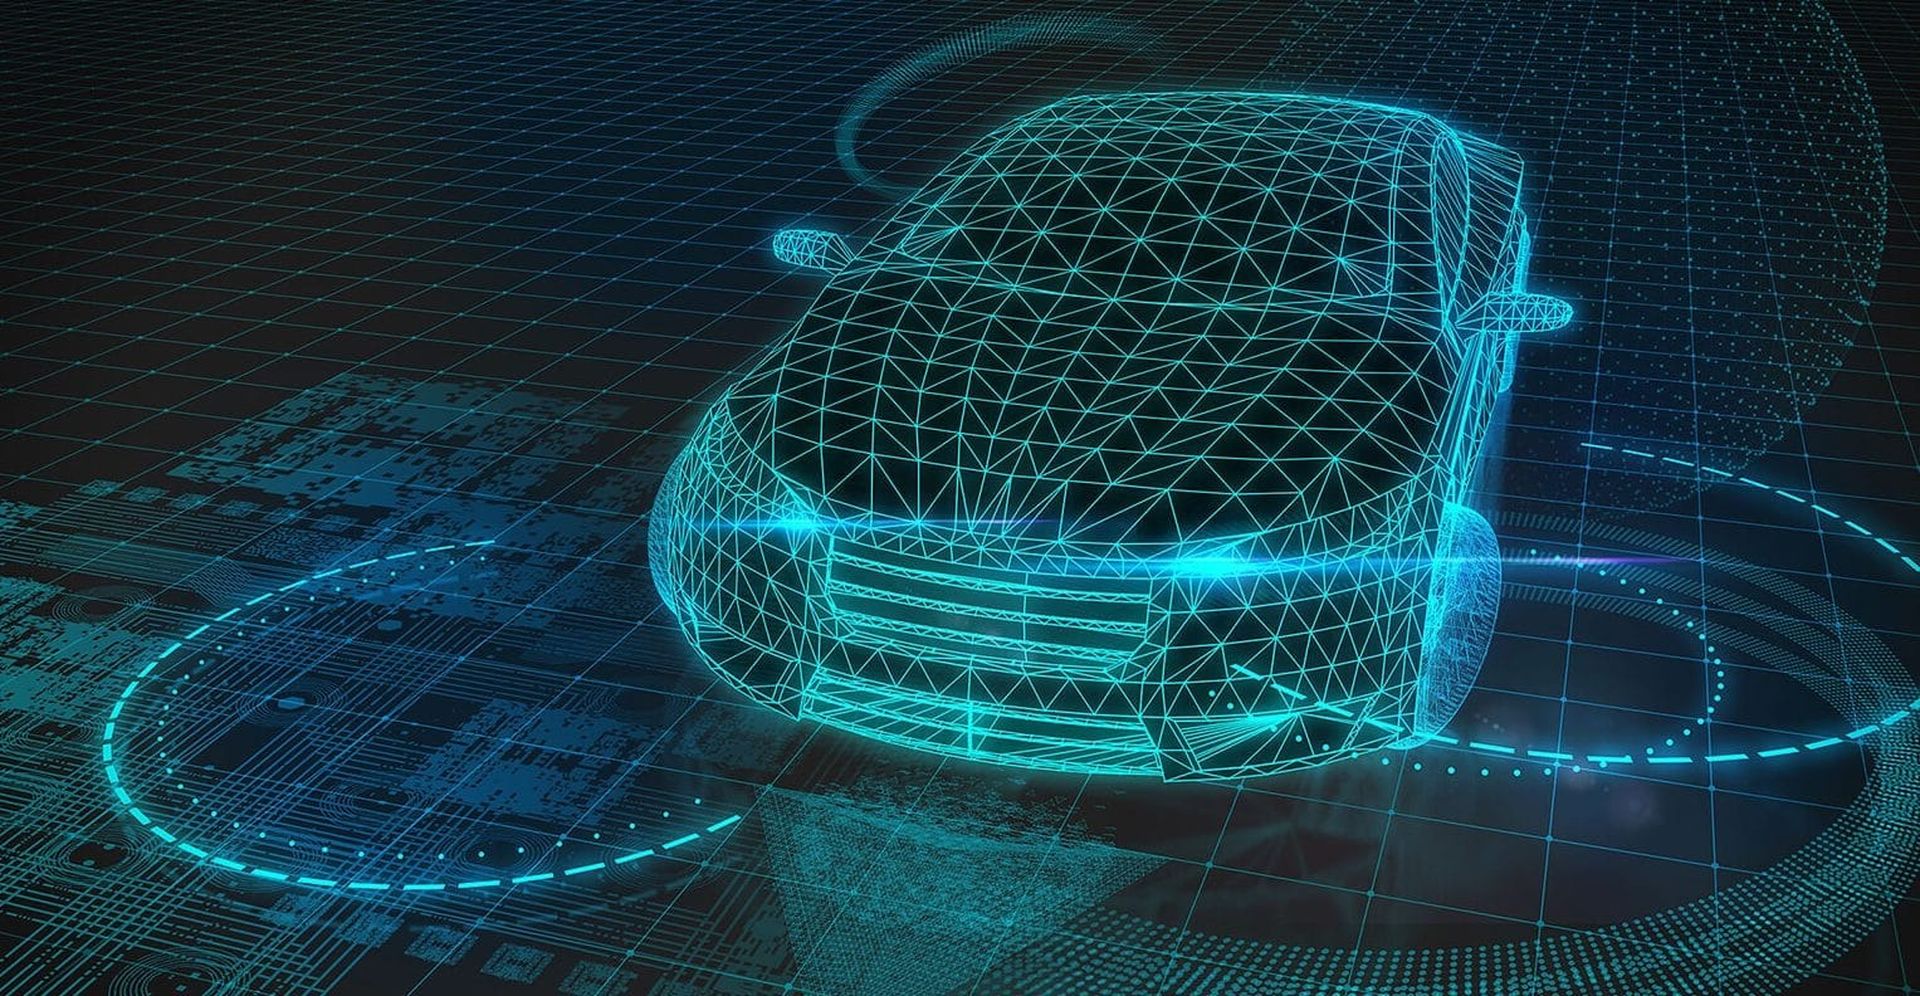 Two of the world's largest automakers Toyota and Nissan have entered the metaverse, major corporations and firms are now following the latest trends in order to gain a competitive advantage.